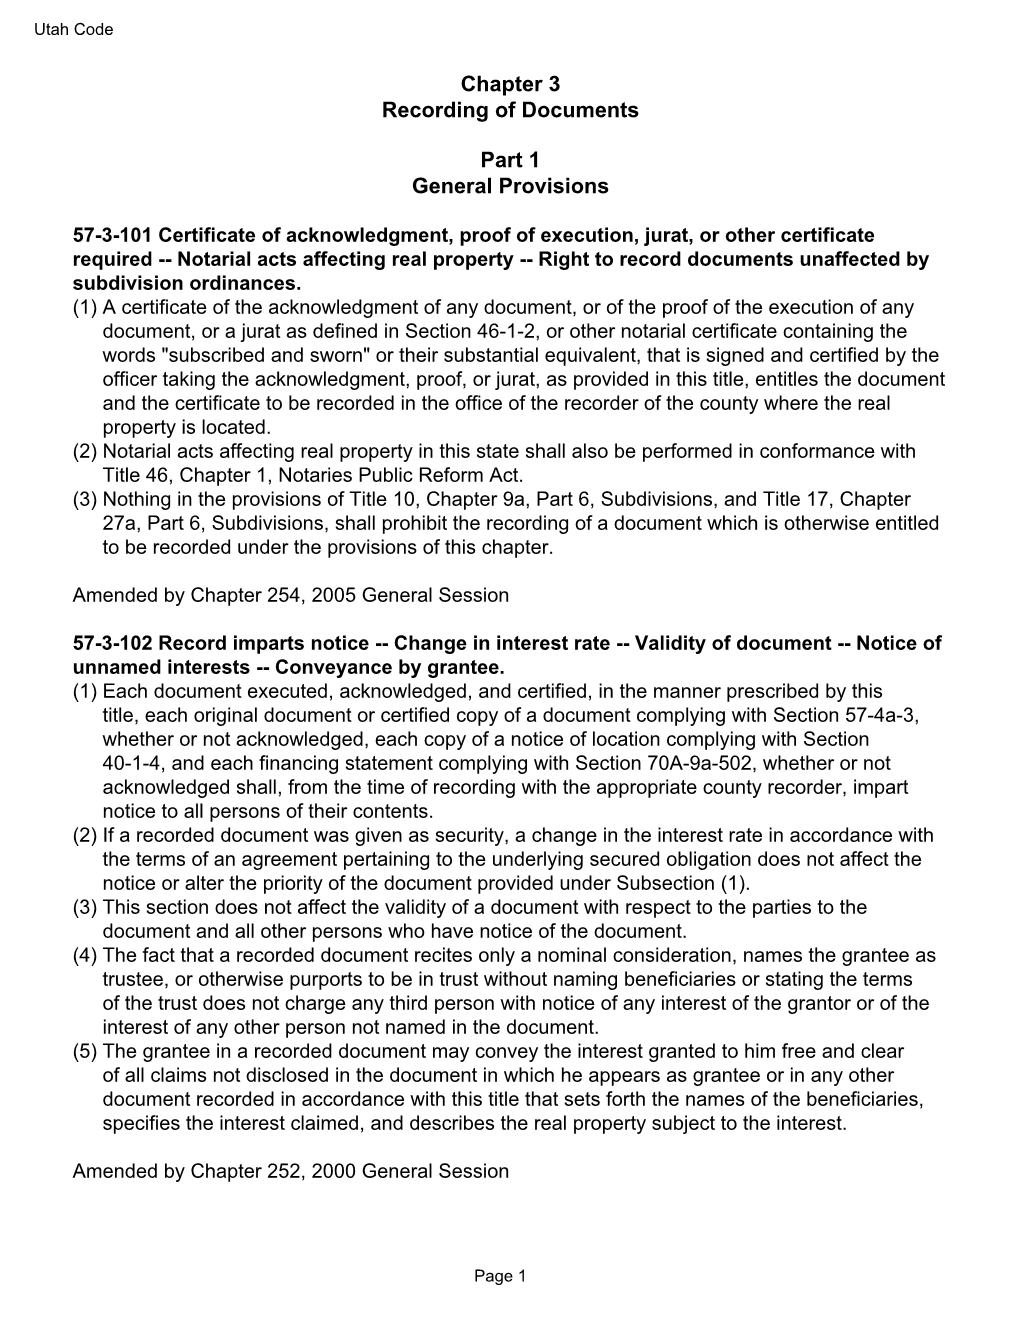 Chapter 3 Recording of Documents Part 1 General Provisions